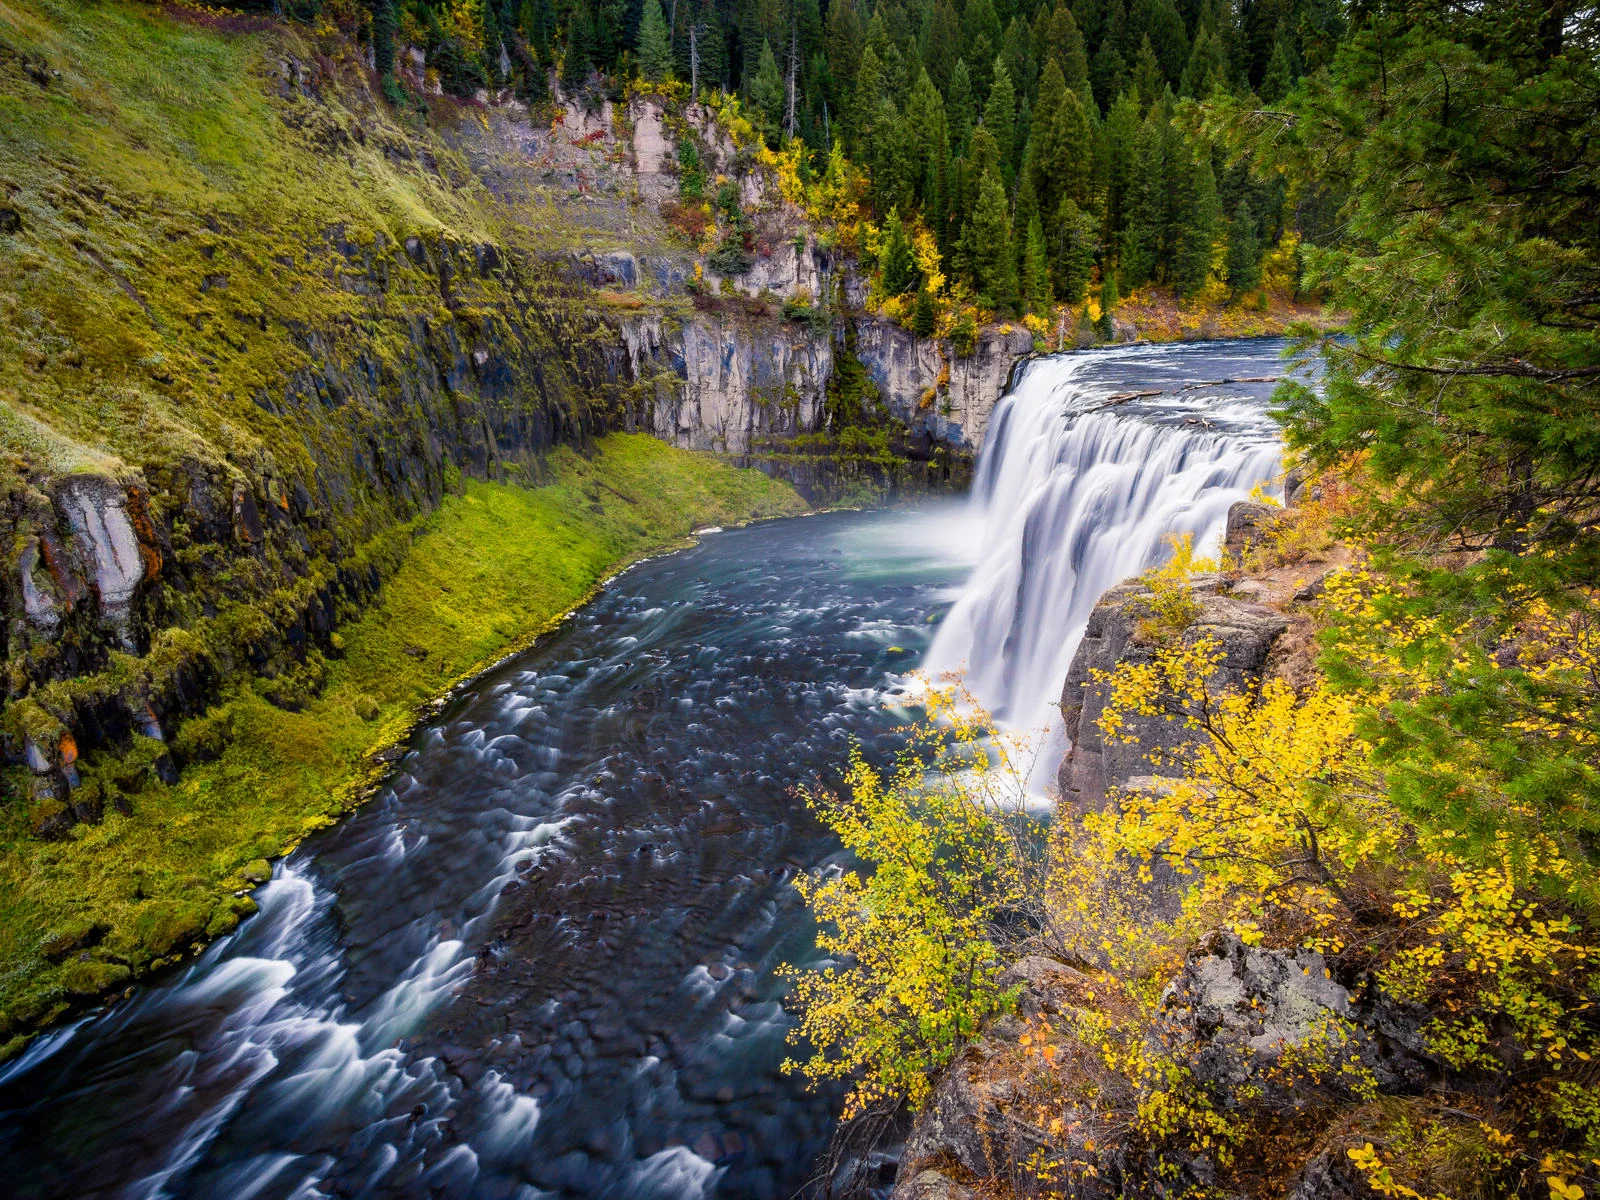 Majestic scene on an Autumn season at Upper Mesa Falls, one of the best things to see in Idaho, where a large stream flows beside moss covered rocks